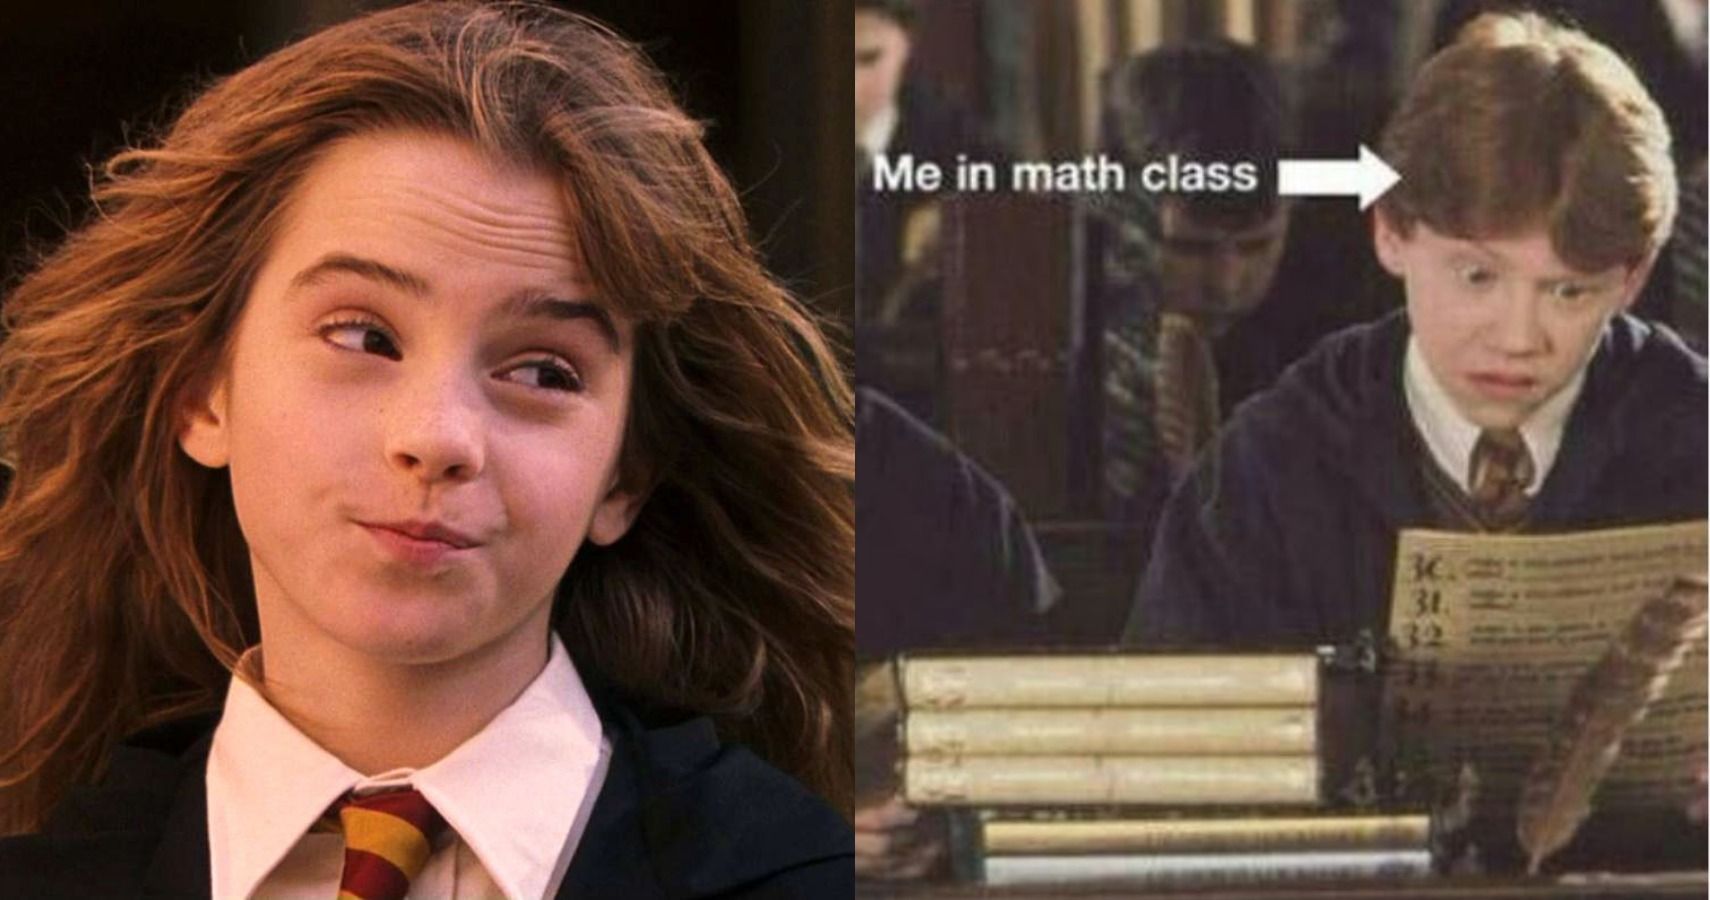 Harry Potter 10 Memes That Ron Weasley Fans Will Love